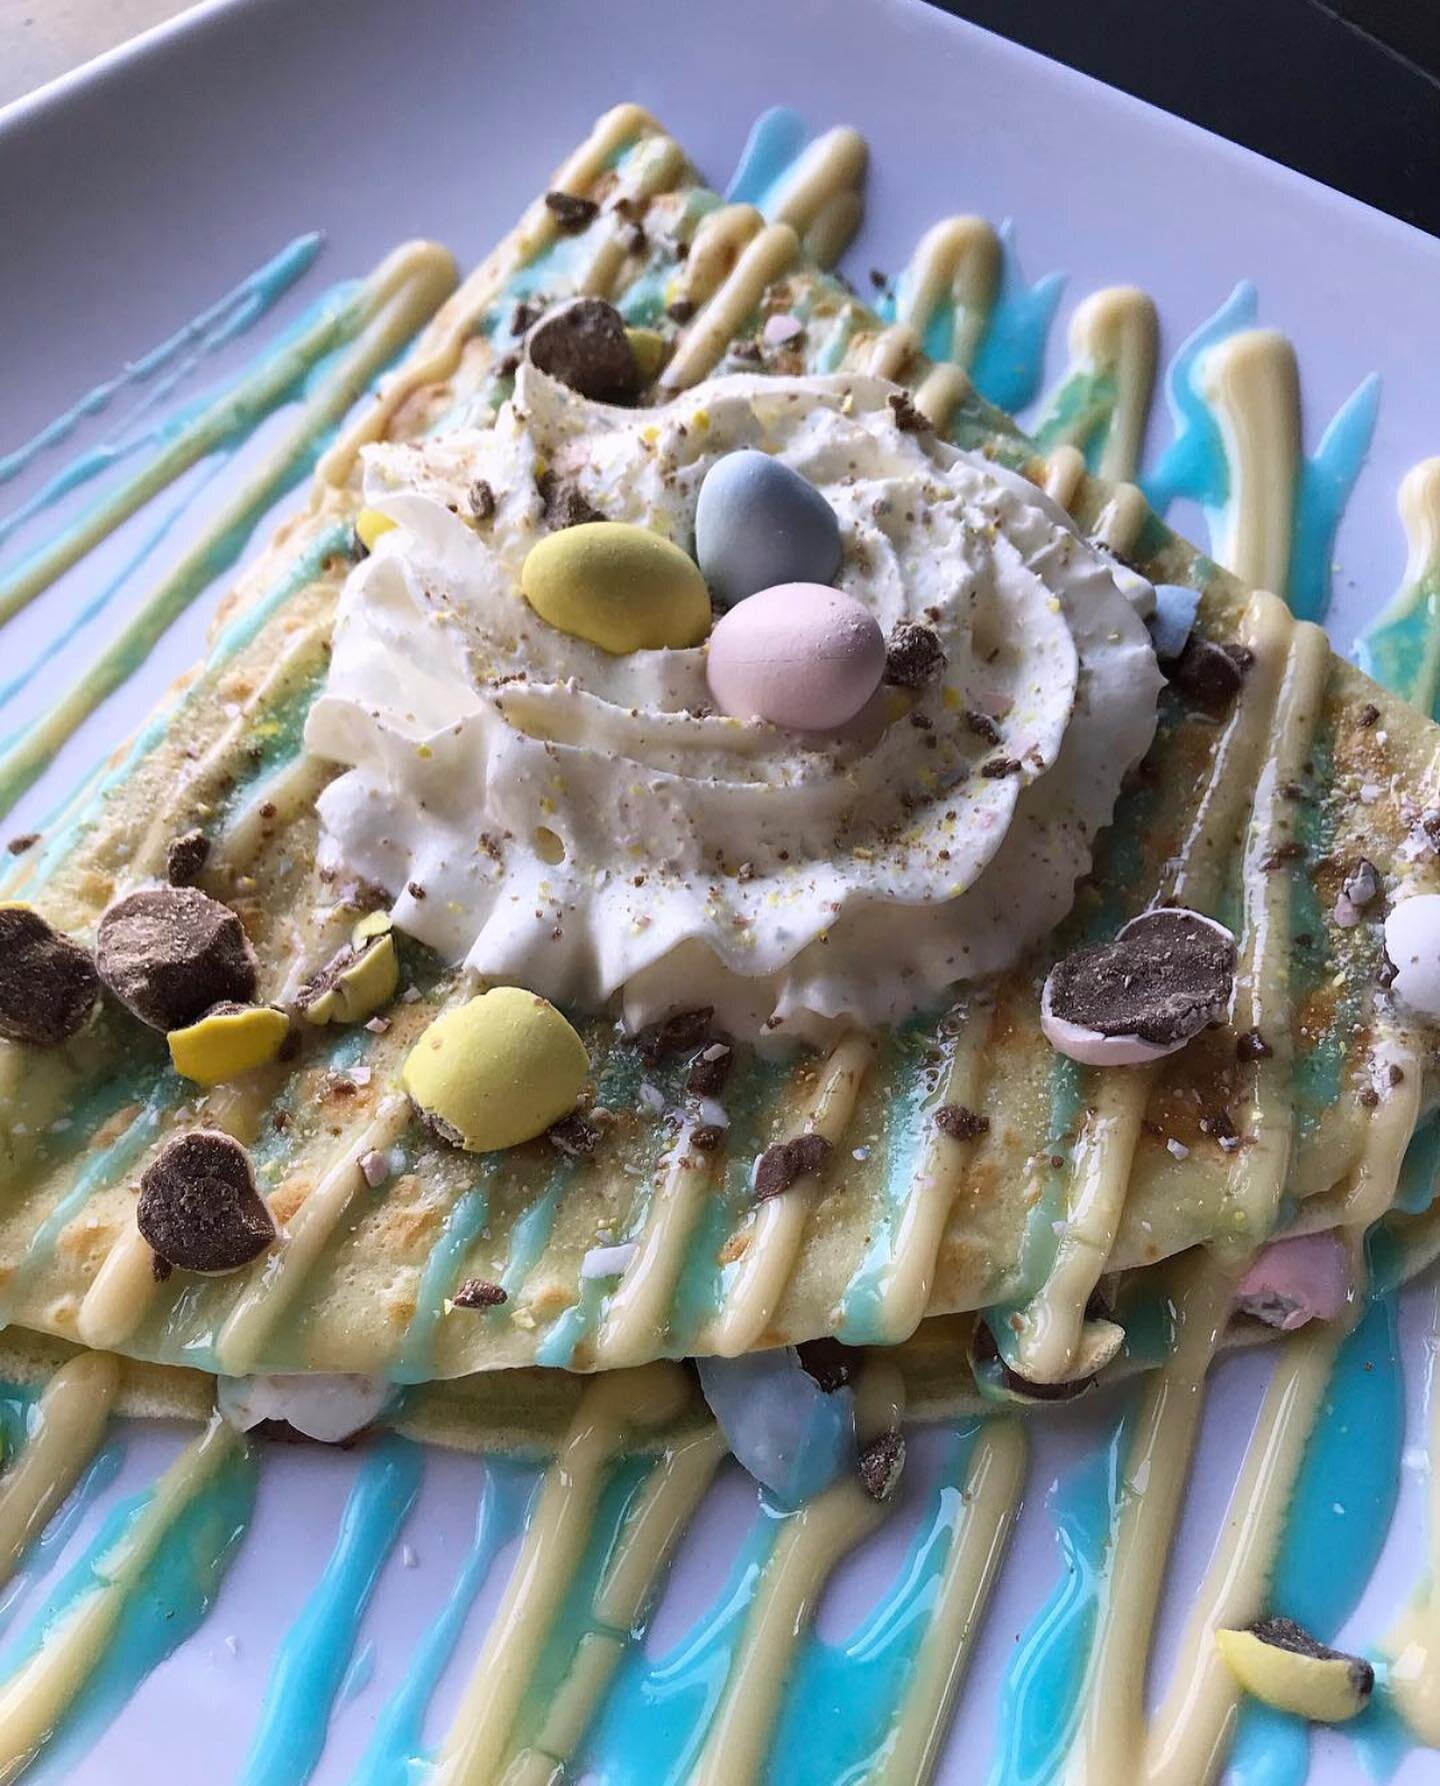 Easter is just around the corner! Our mini egg crepe is back for a limited time starting today 🐣🌷

This cr&ecirc;pe comes filled with crushed mini eggs and topped with custard, royal icing, a nest of whipped cream (served on the side) and - you gue